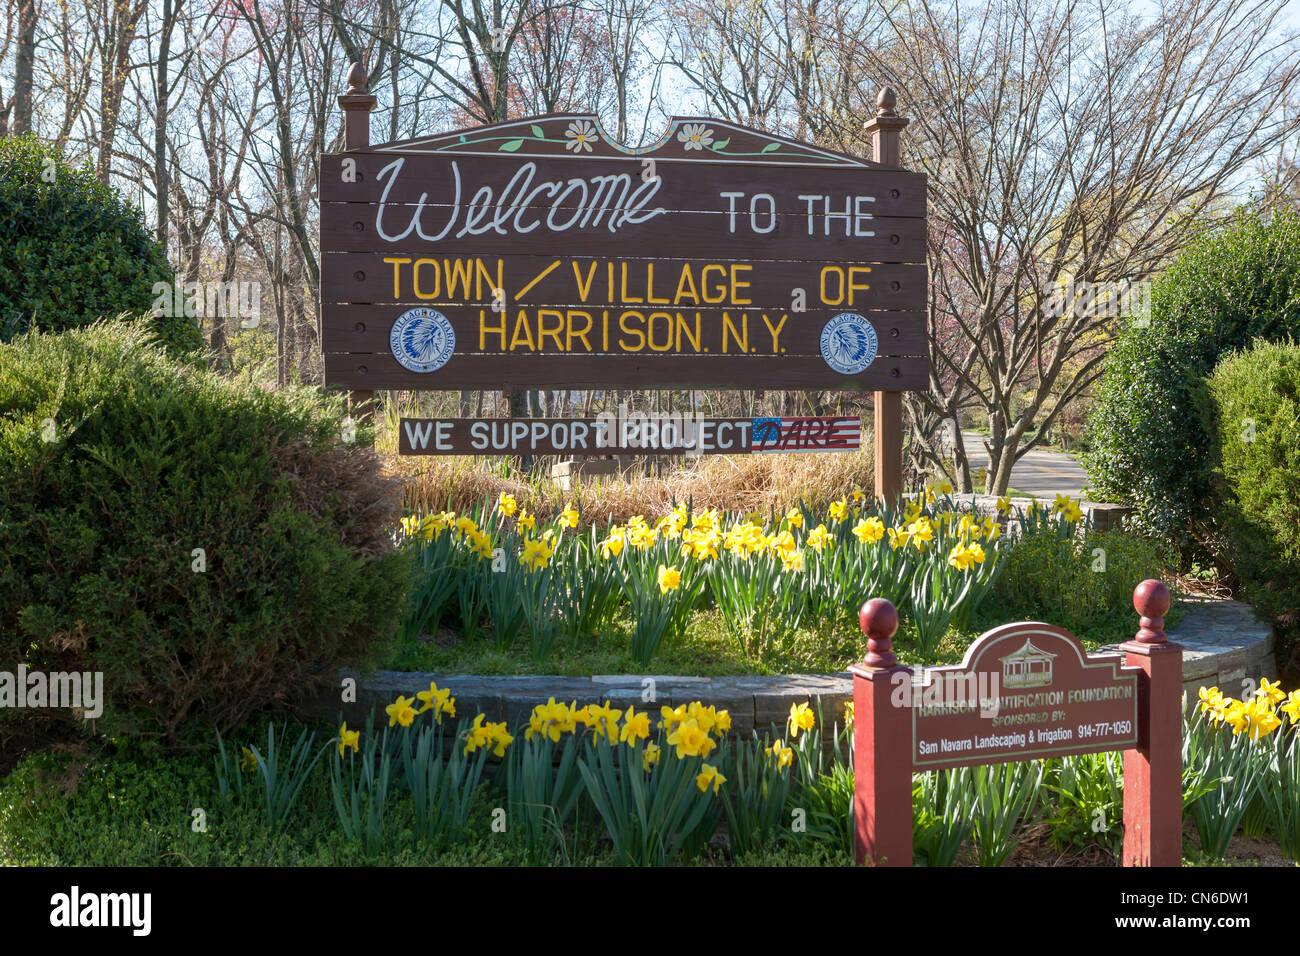 A sign welcomes visitors to the town / village of Harrison, New York Stock Photo